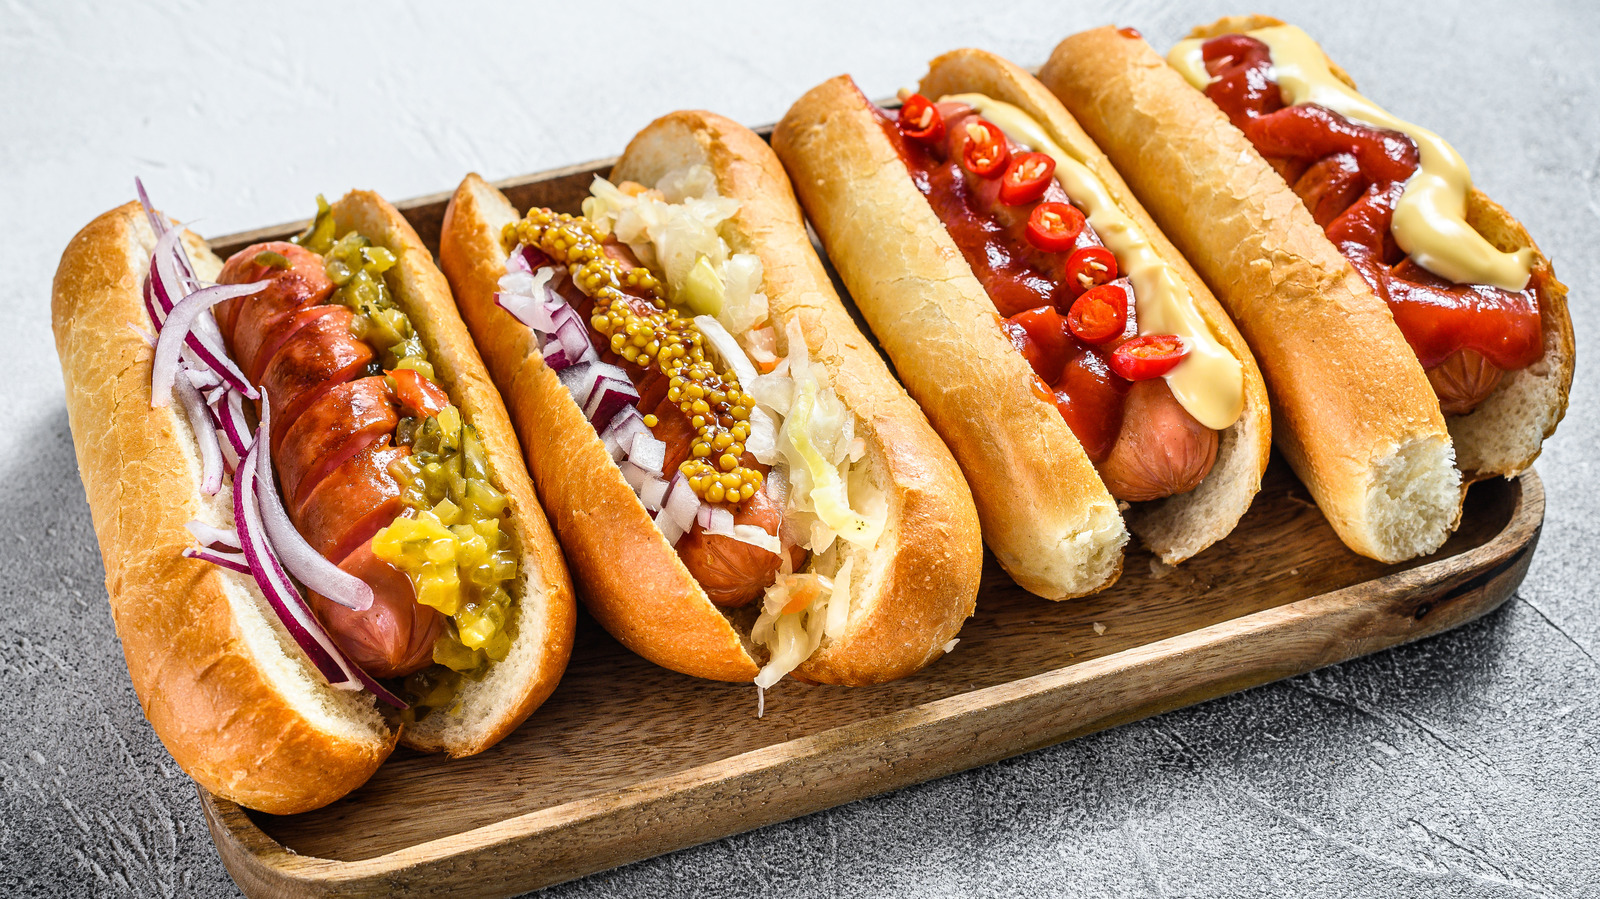 Are Hebrew National Kosher Hot Dogs Healthier than the Rest?